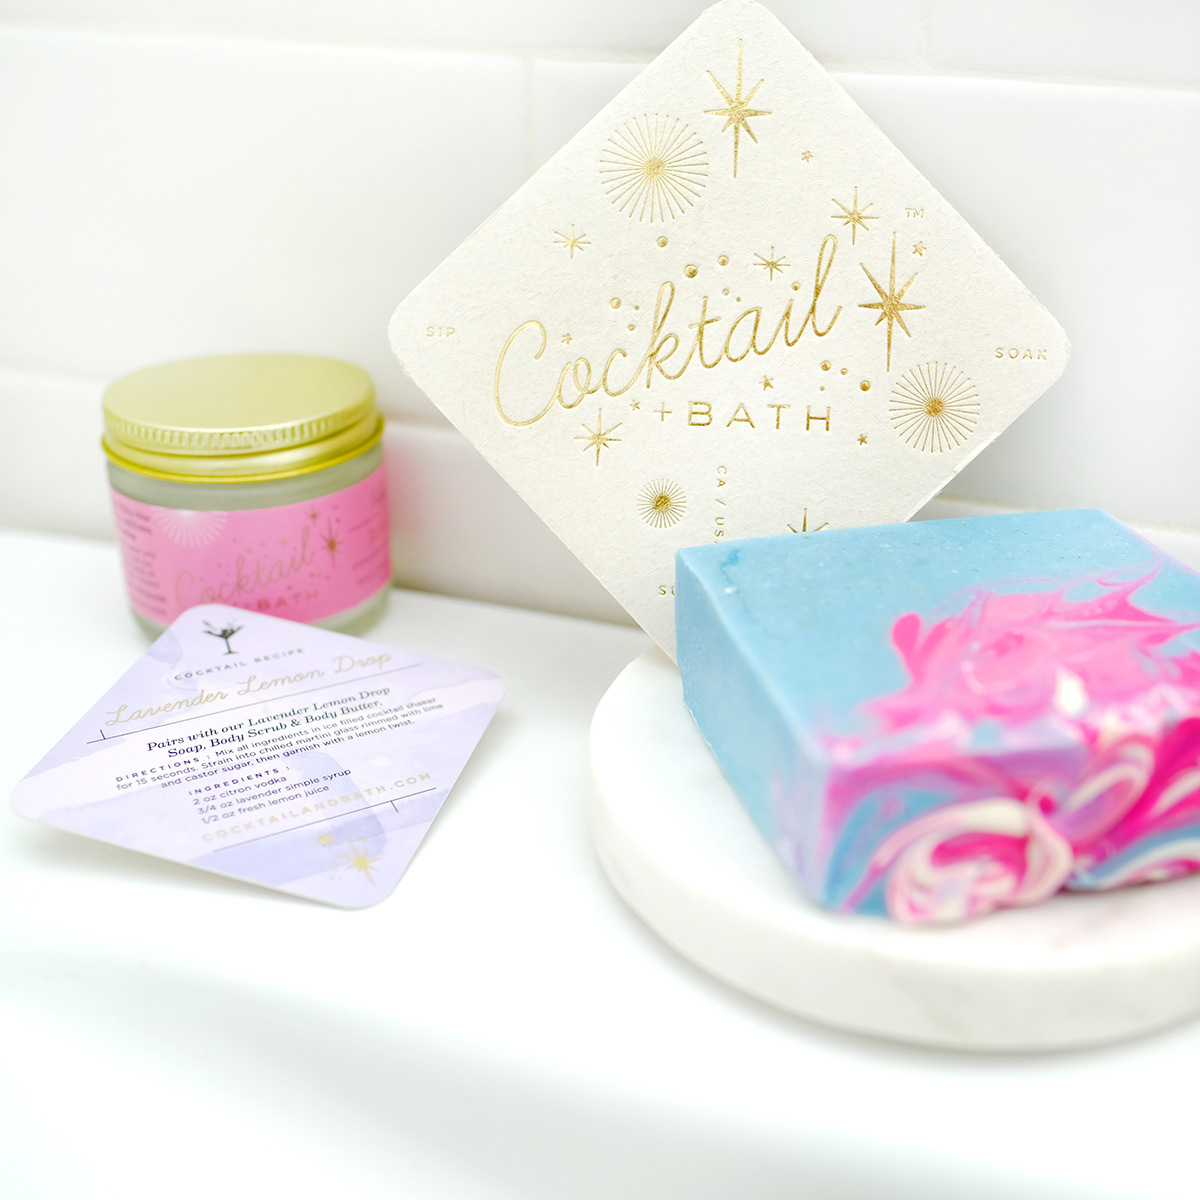 foil stamping Packaging cosmetics soap cocktails